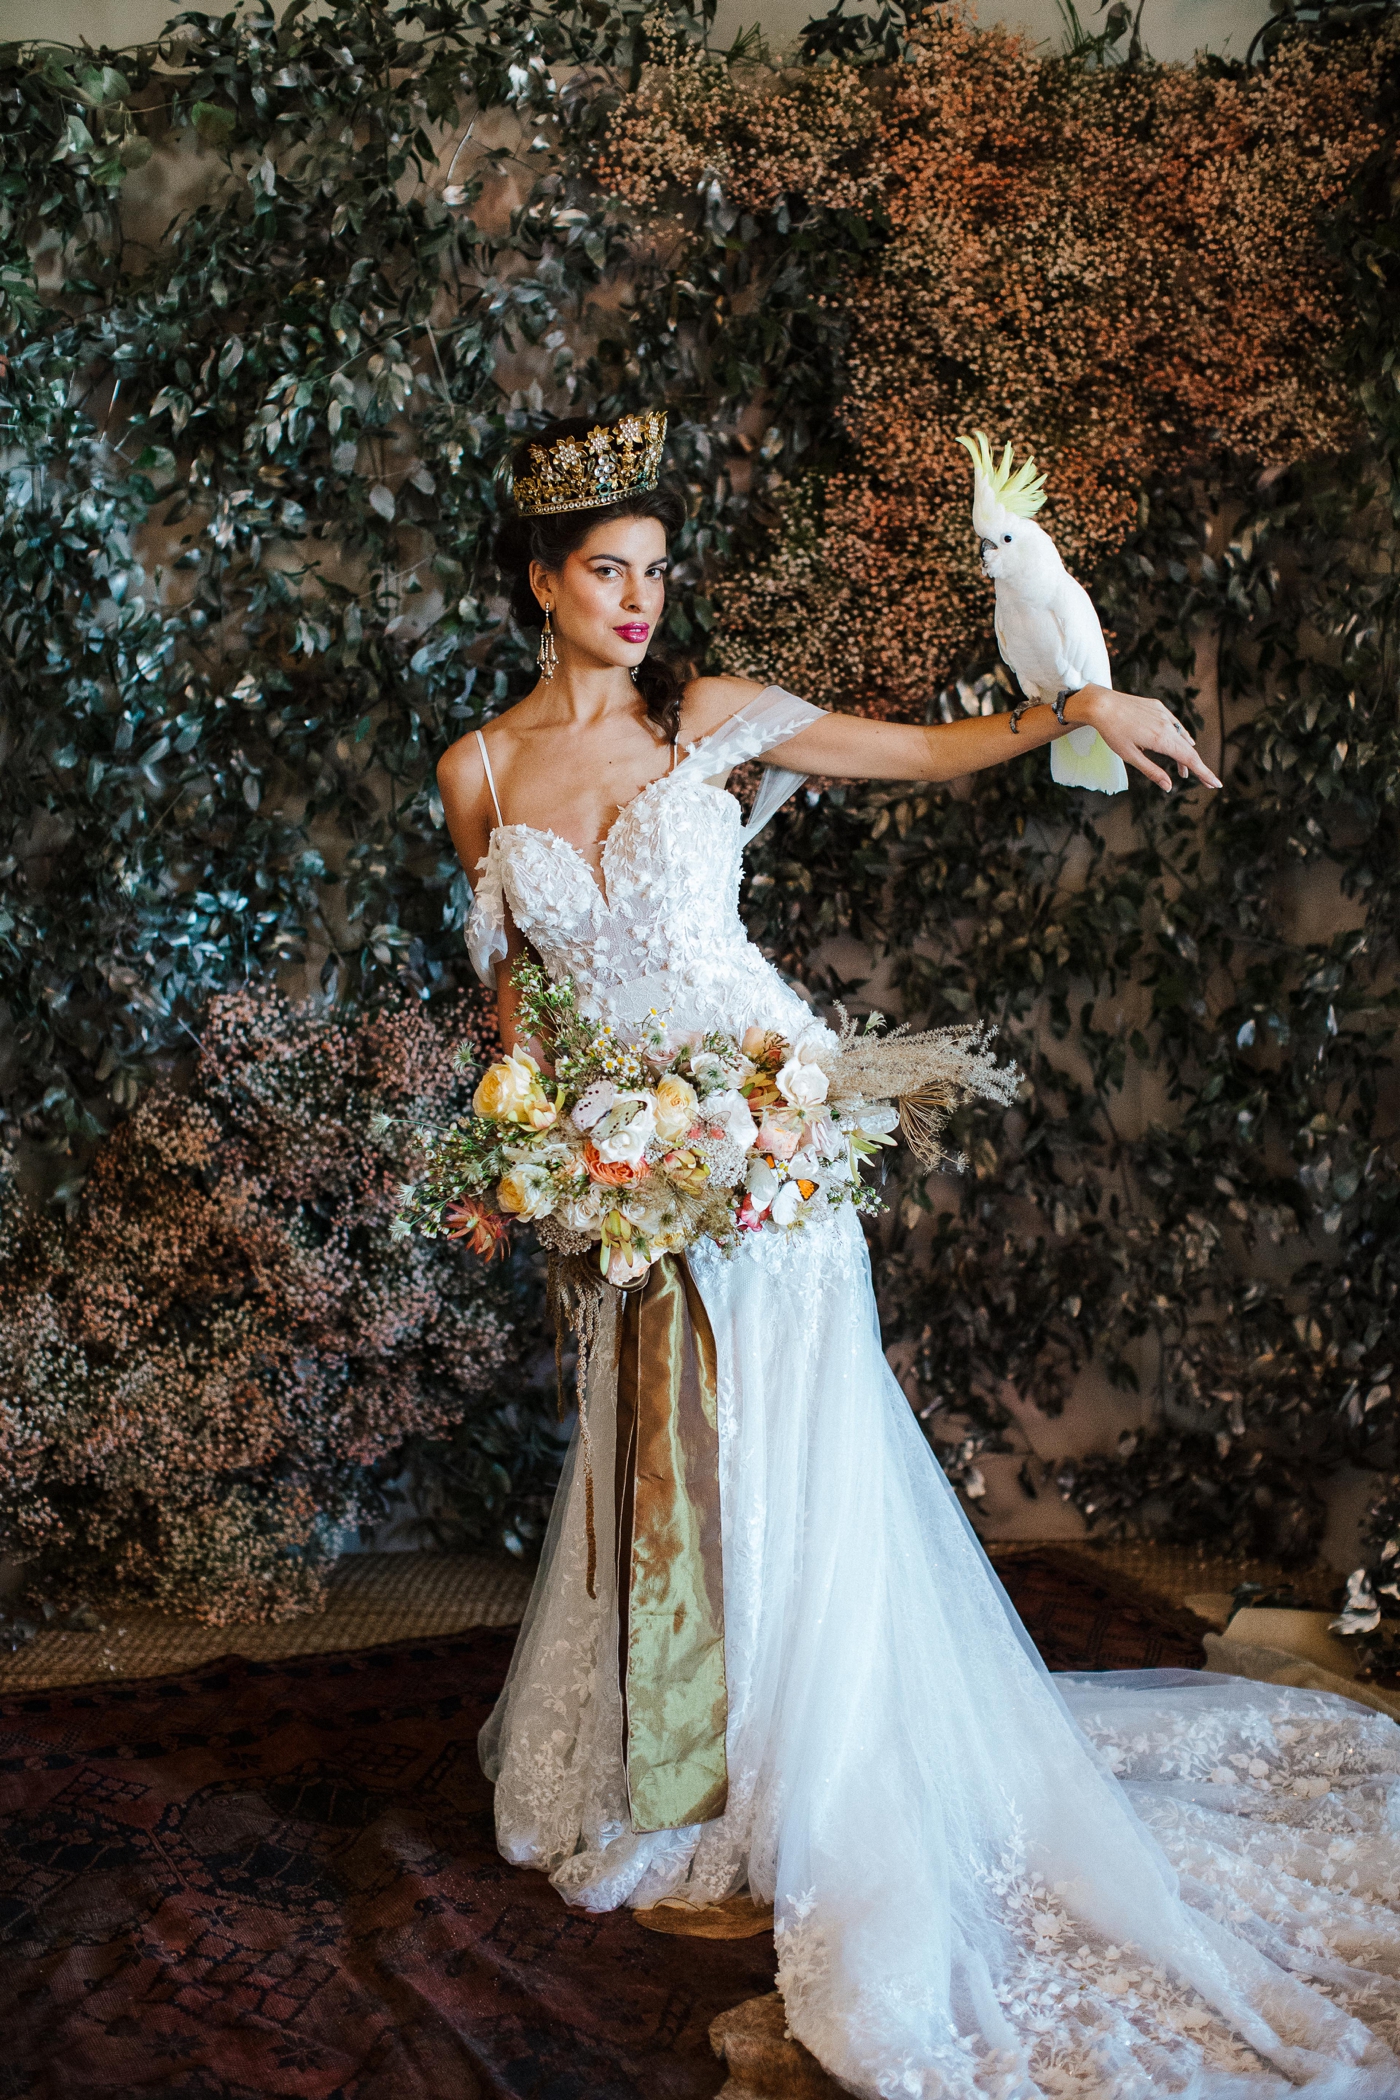 Gown by Martina Liana Bridal from Bleuebelle bridal in Savannah | Izzy and Co.